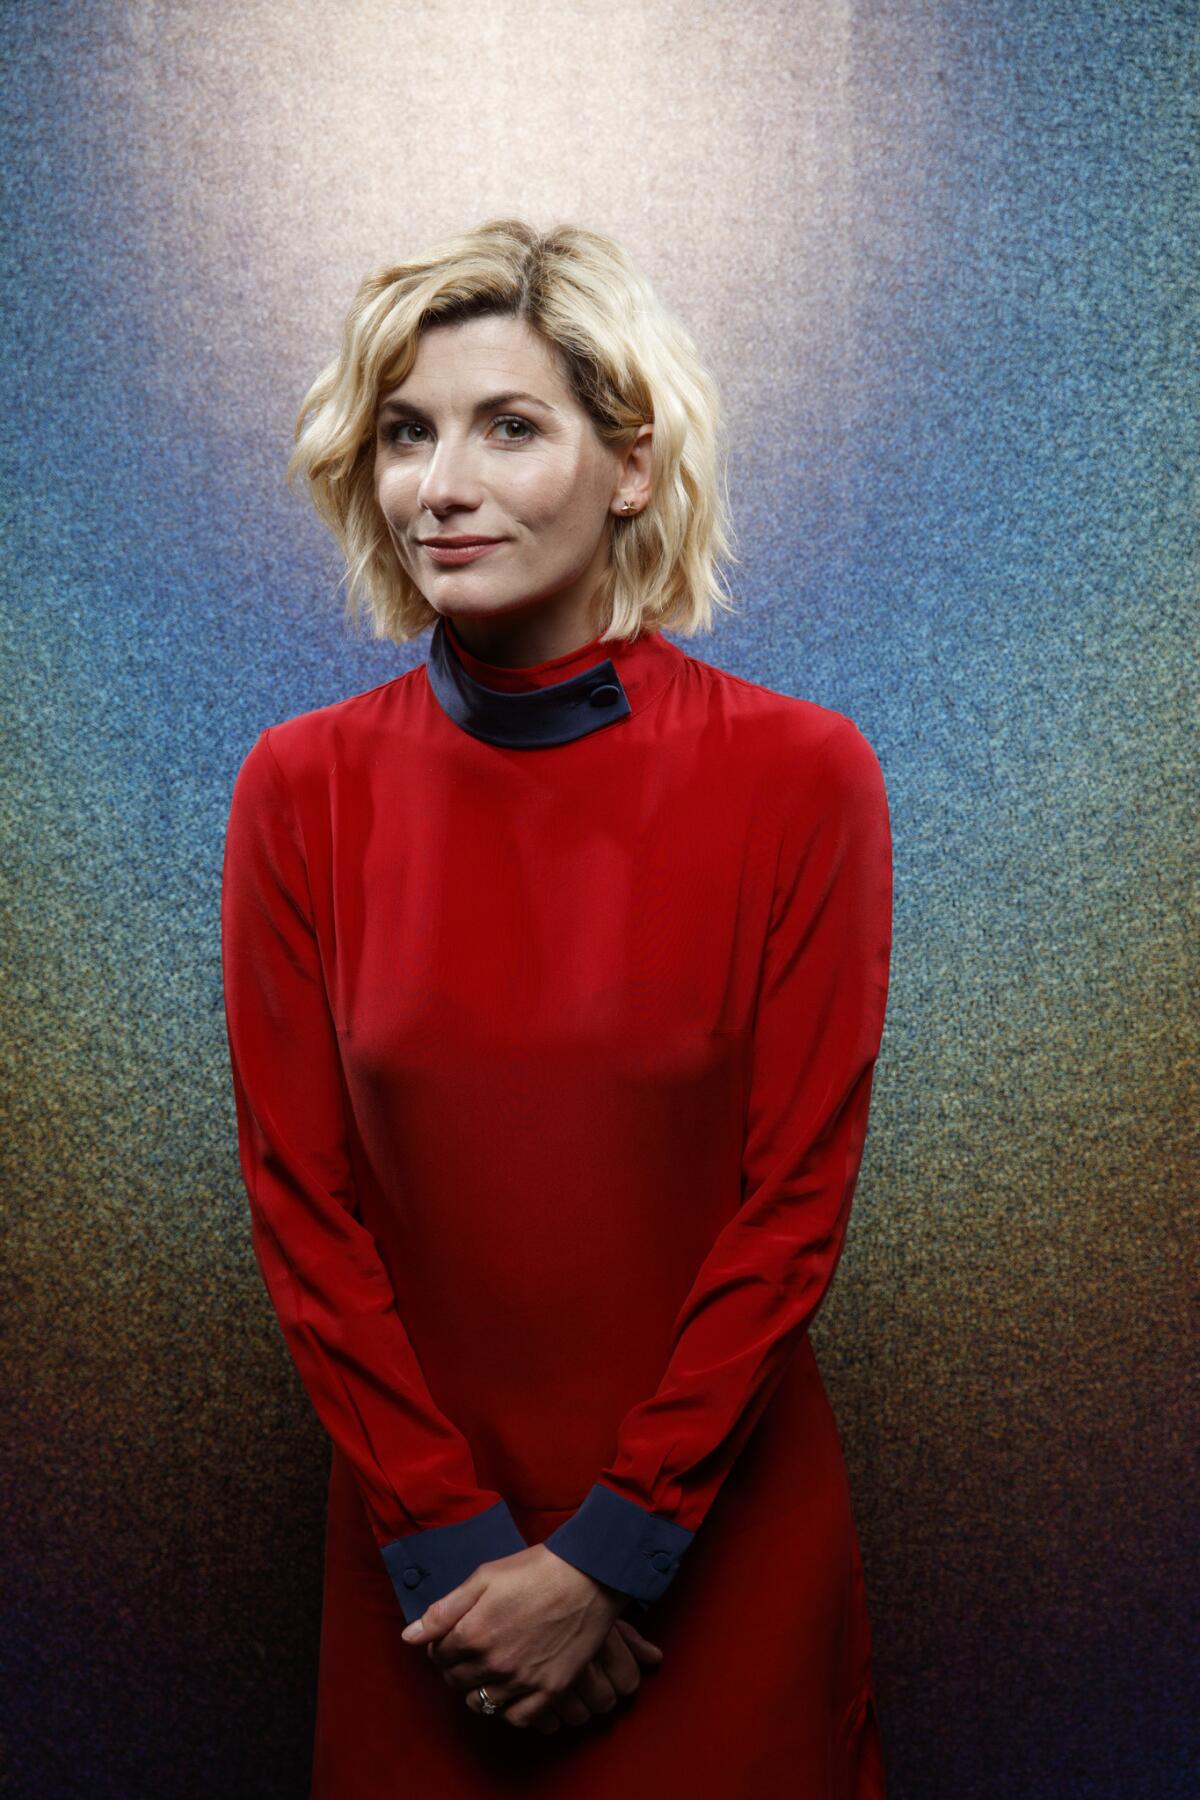 Jodie Whittaker from the television series "Doctor Who."